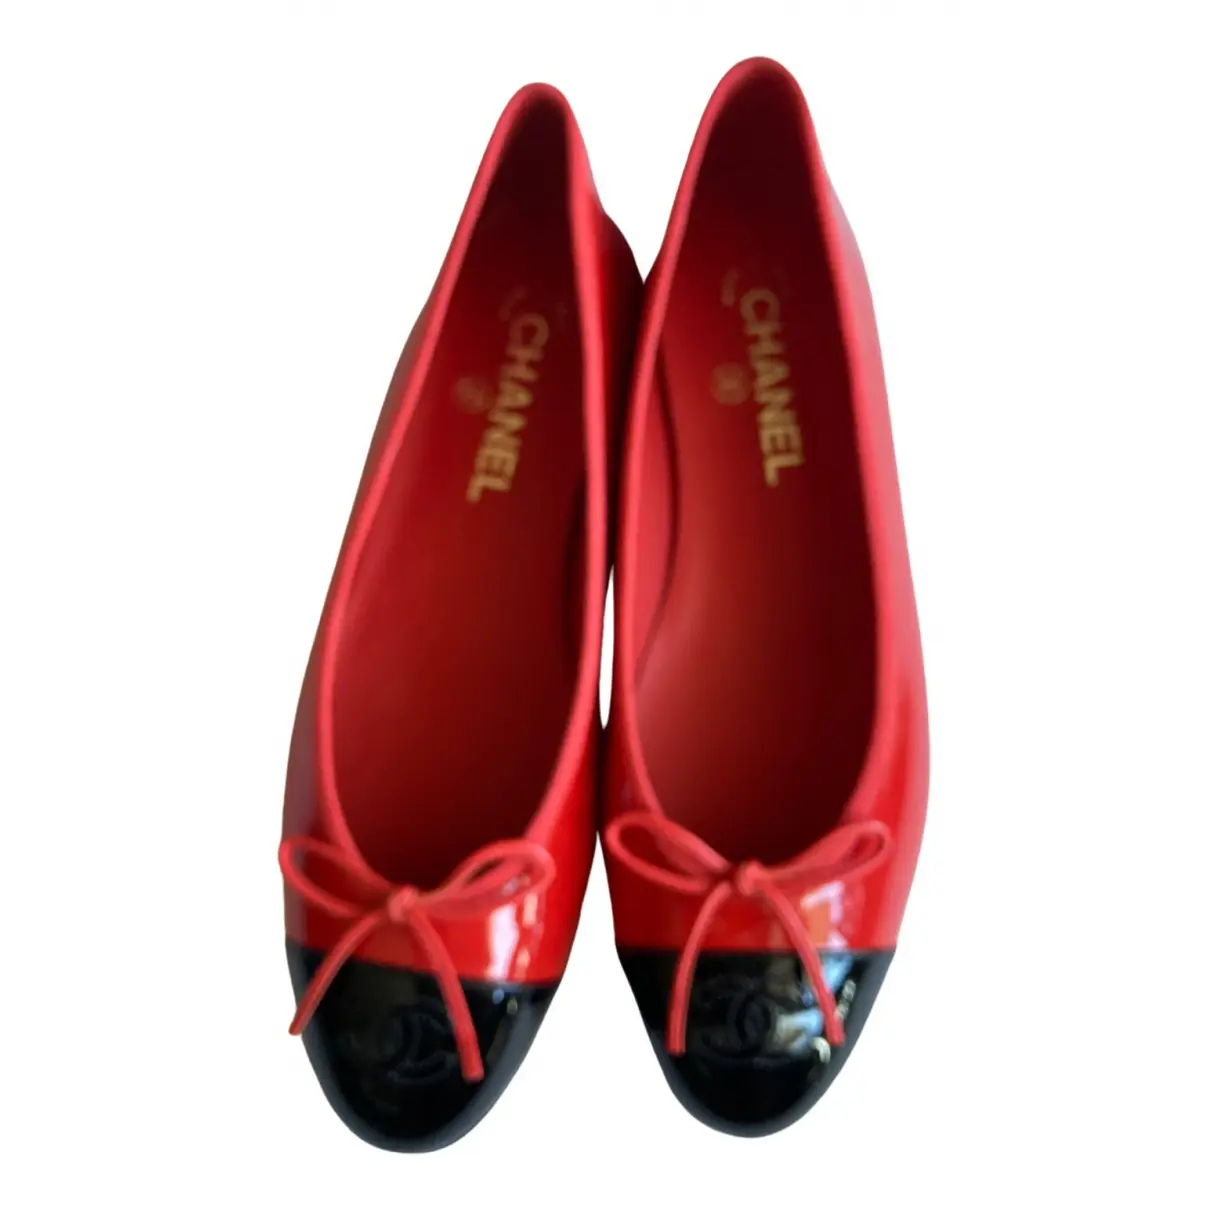 Cambon patent leather ballet flats Chanel